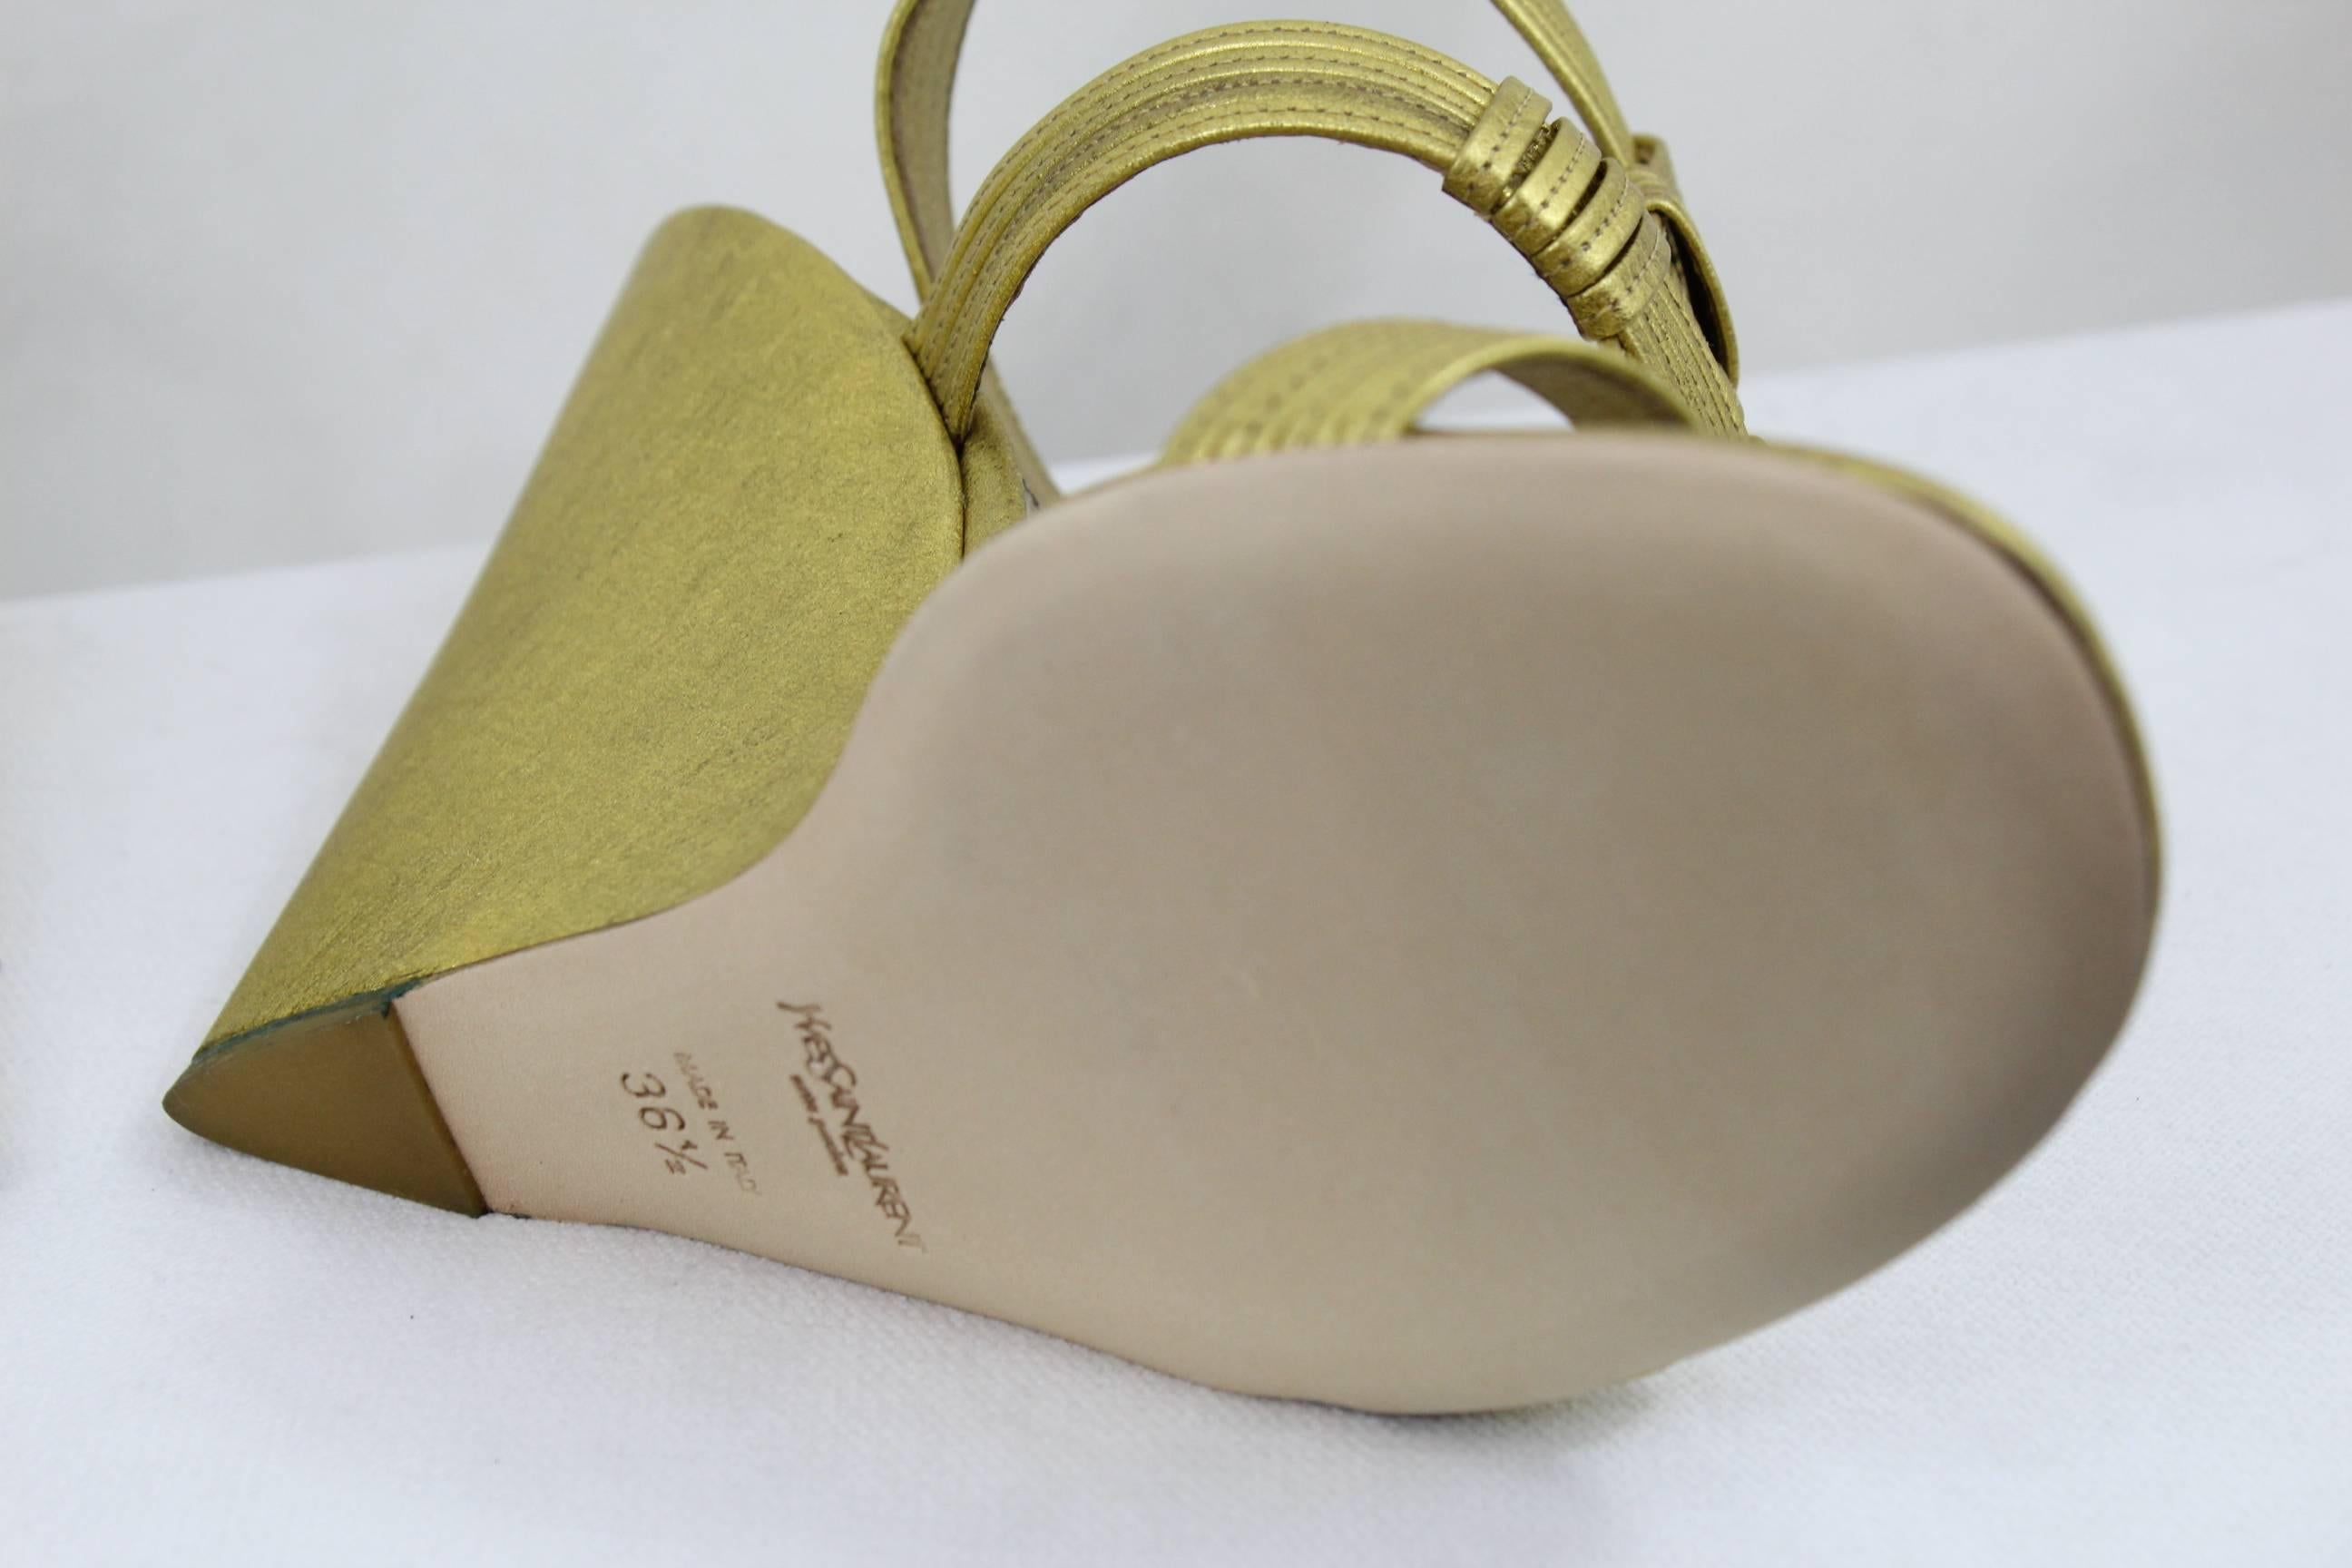 Really nice pair of golden sandals from YSL. Almost new

retail price 850€